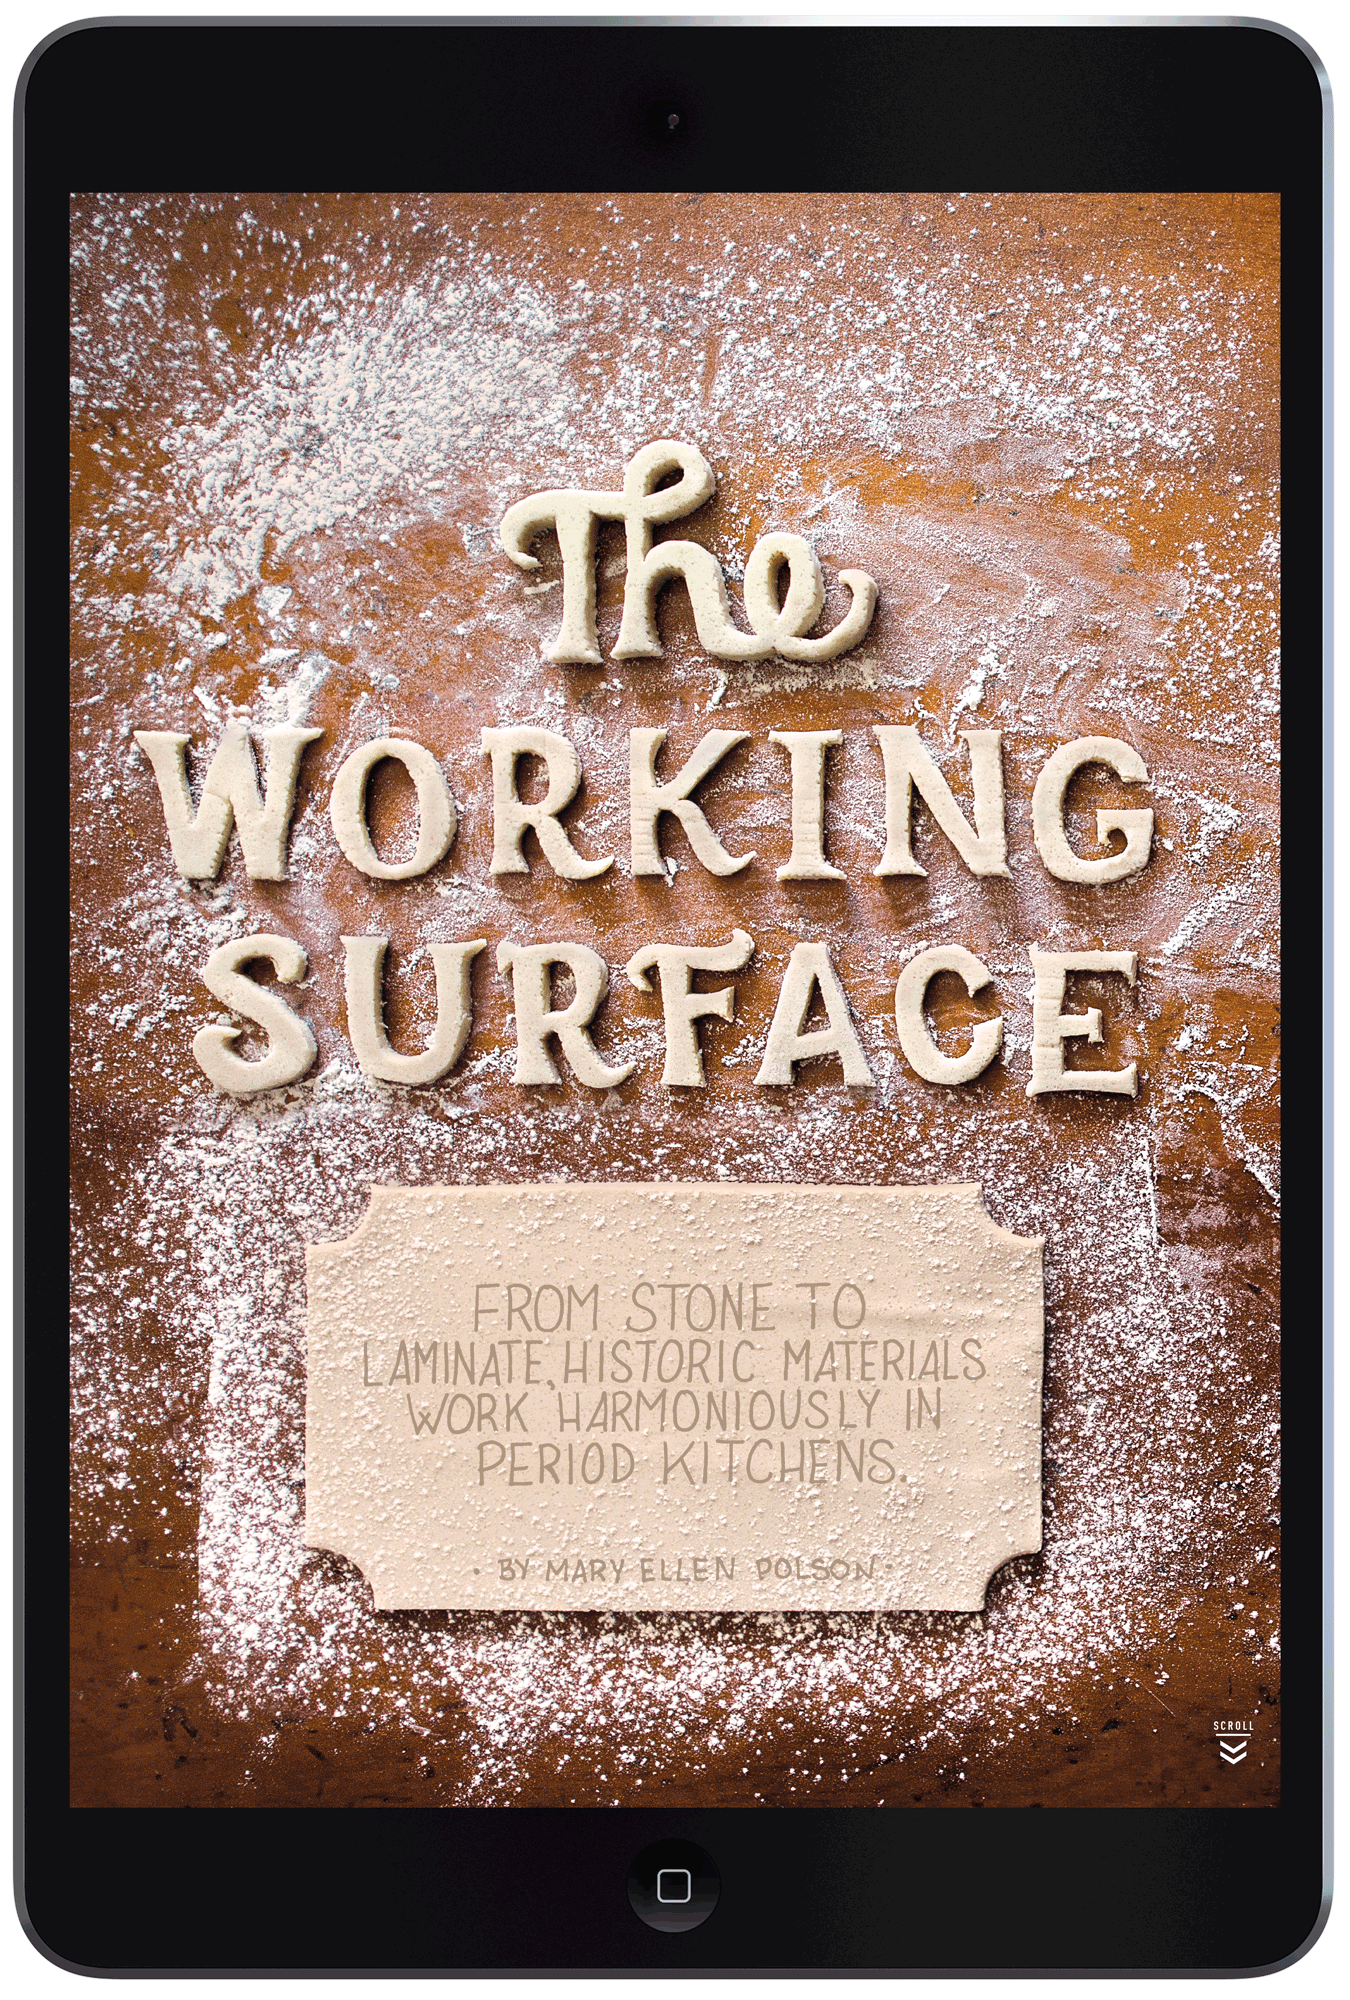 The Working Surface by Megan Hillman